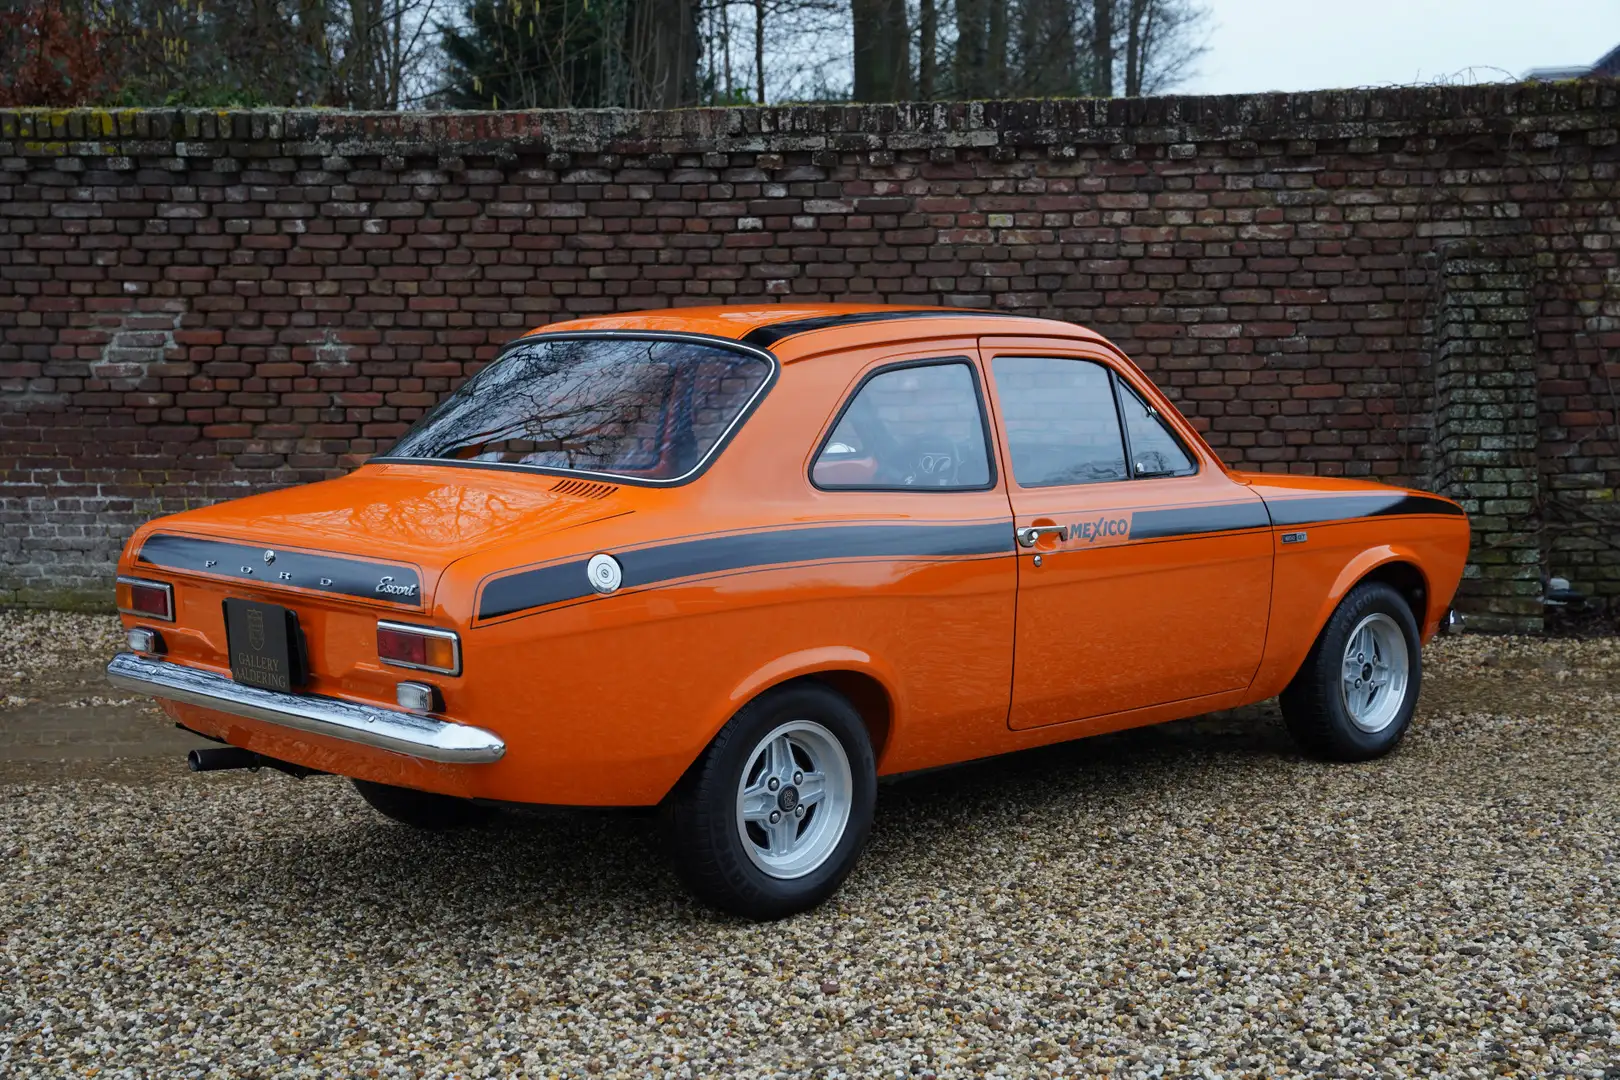 Ford Escort RS Mexico 1600 GT Mk1 Delivered new in Switzerland Arancione - 2